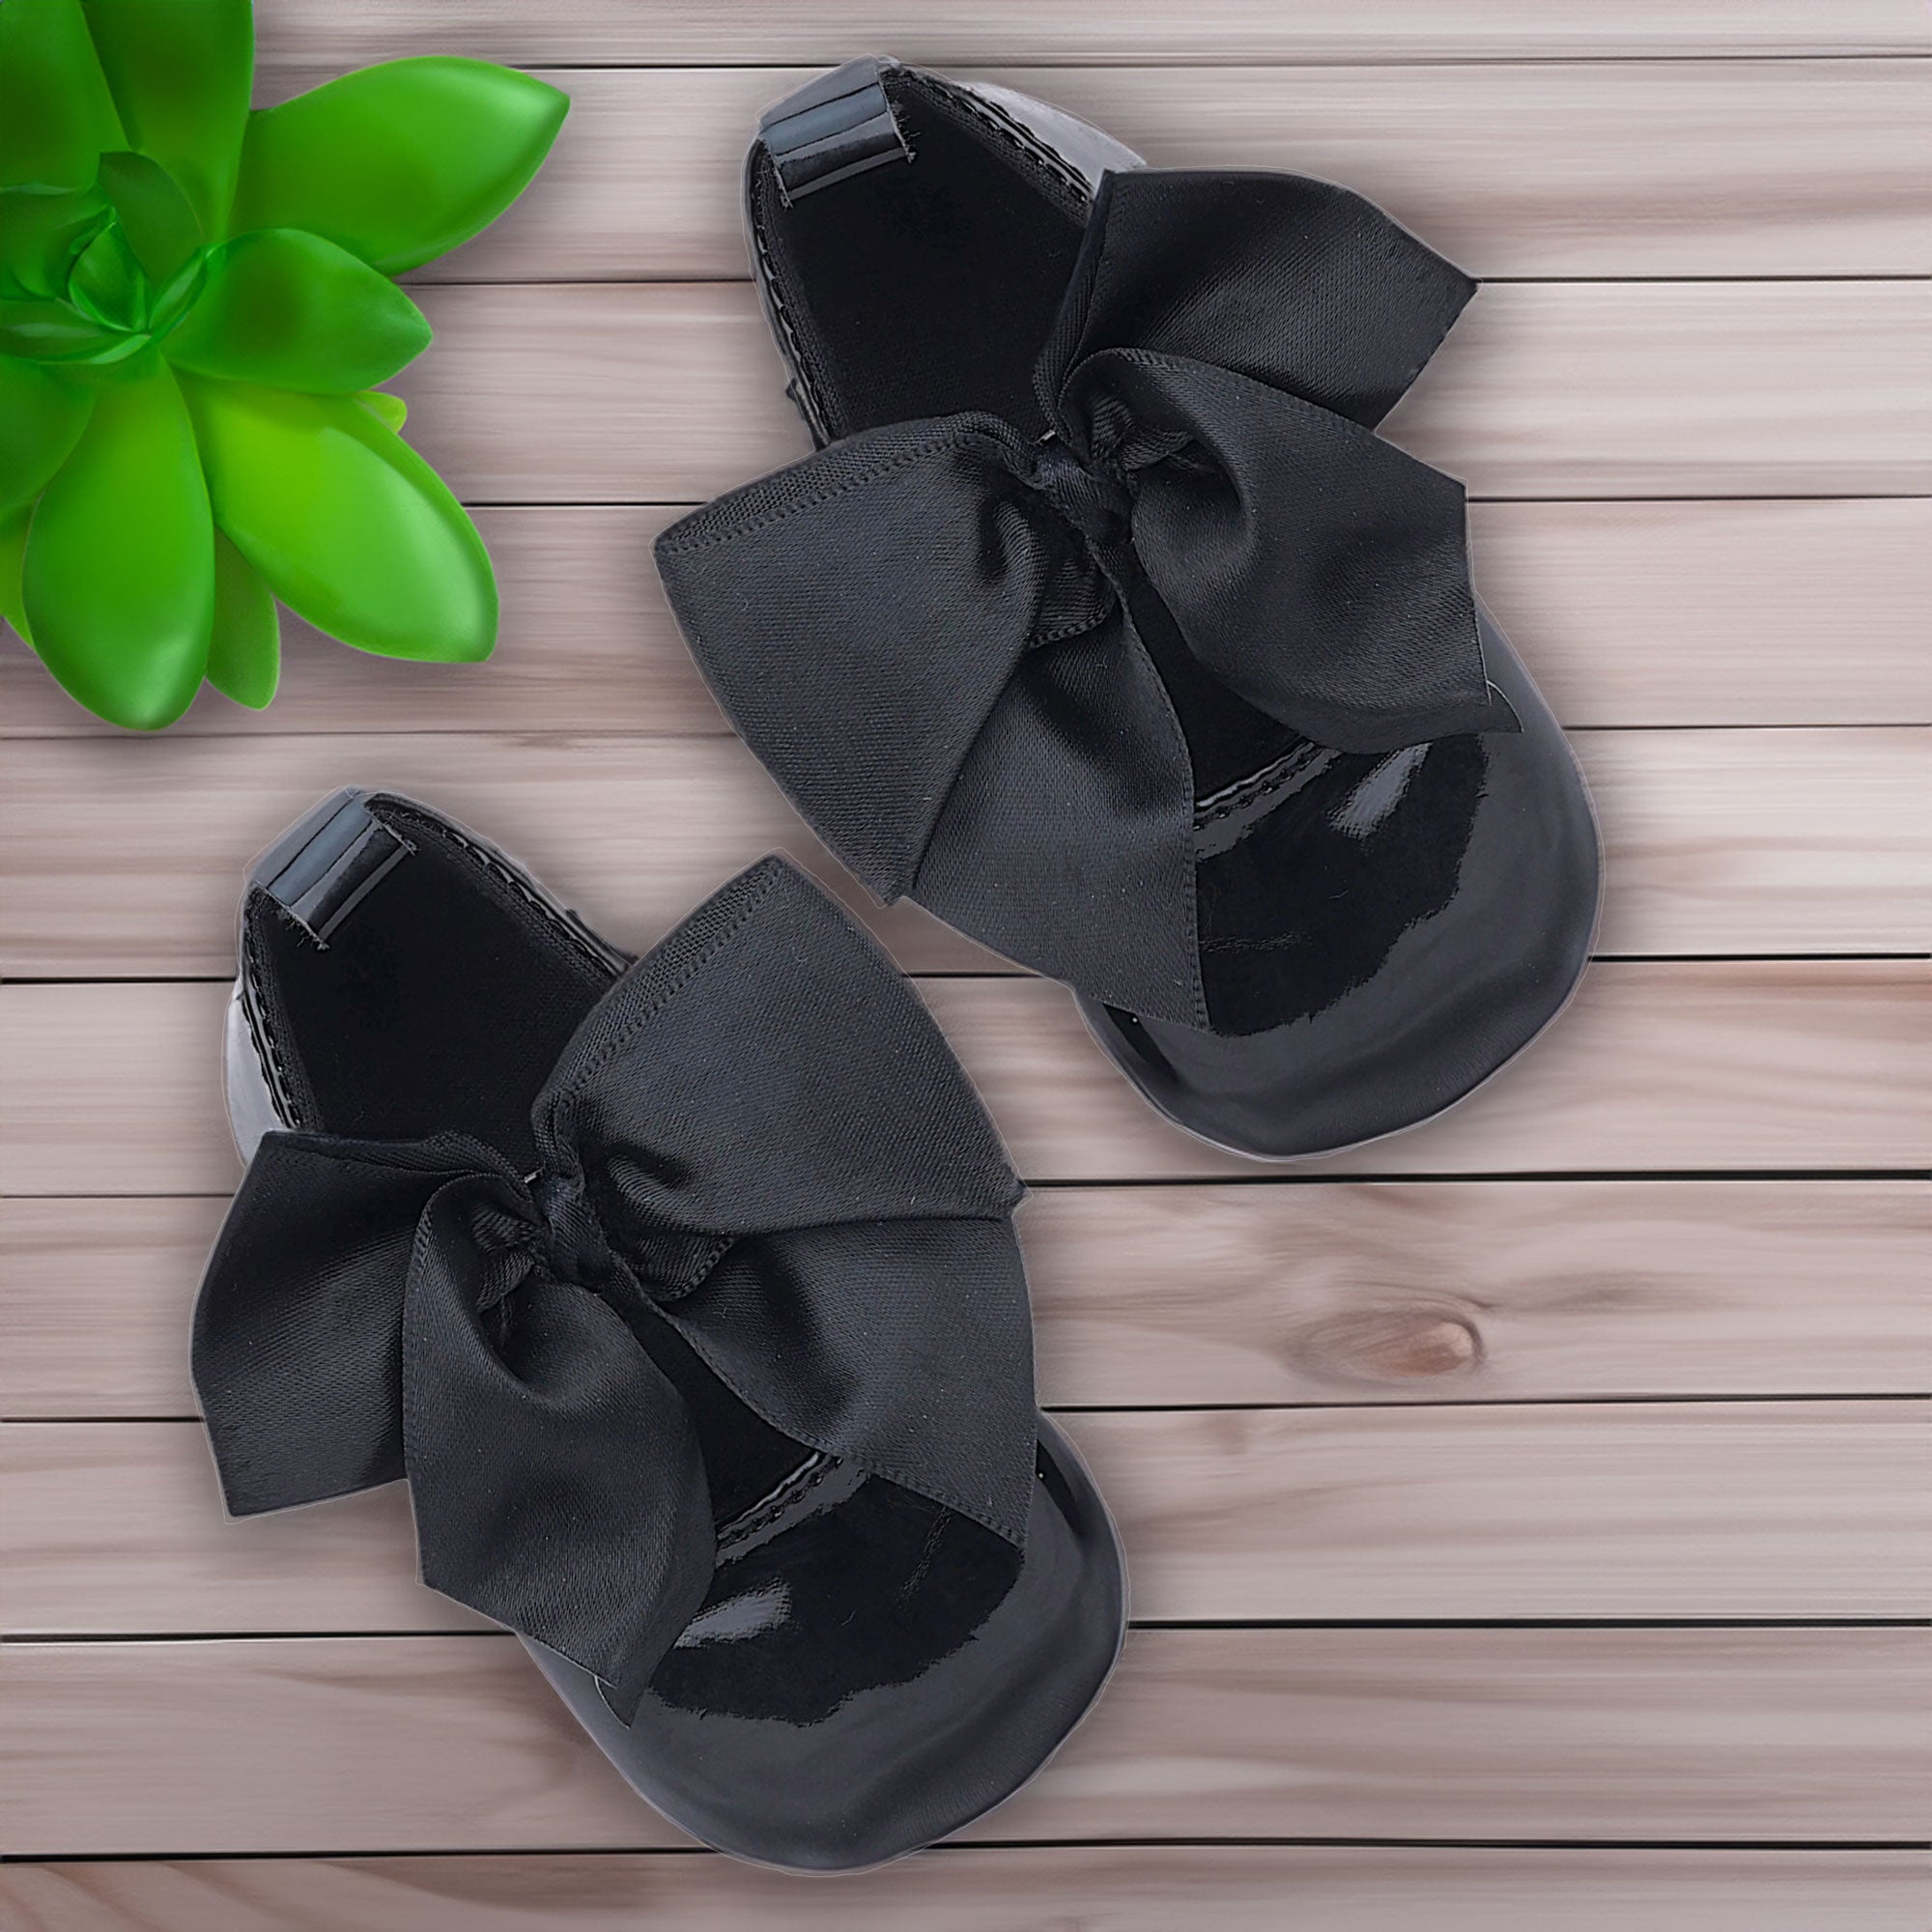 Baby Moo Partywear Patent Leather Big Bow Anti-Skid Ballerina Booties - Black